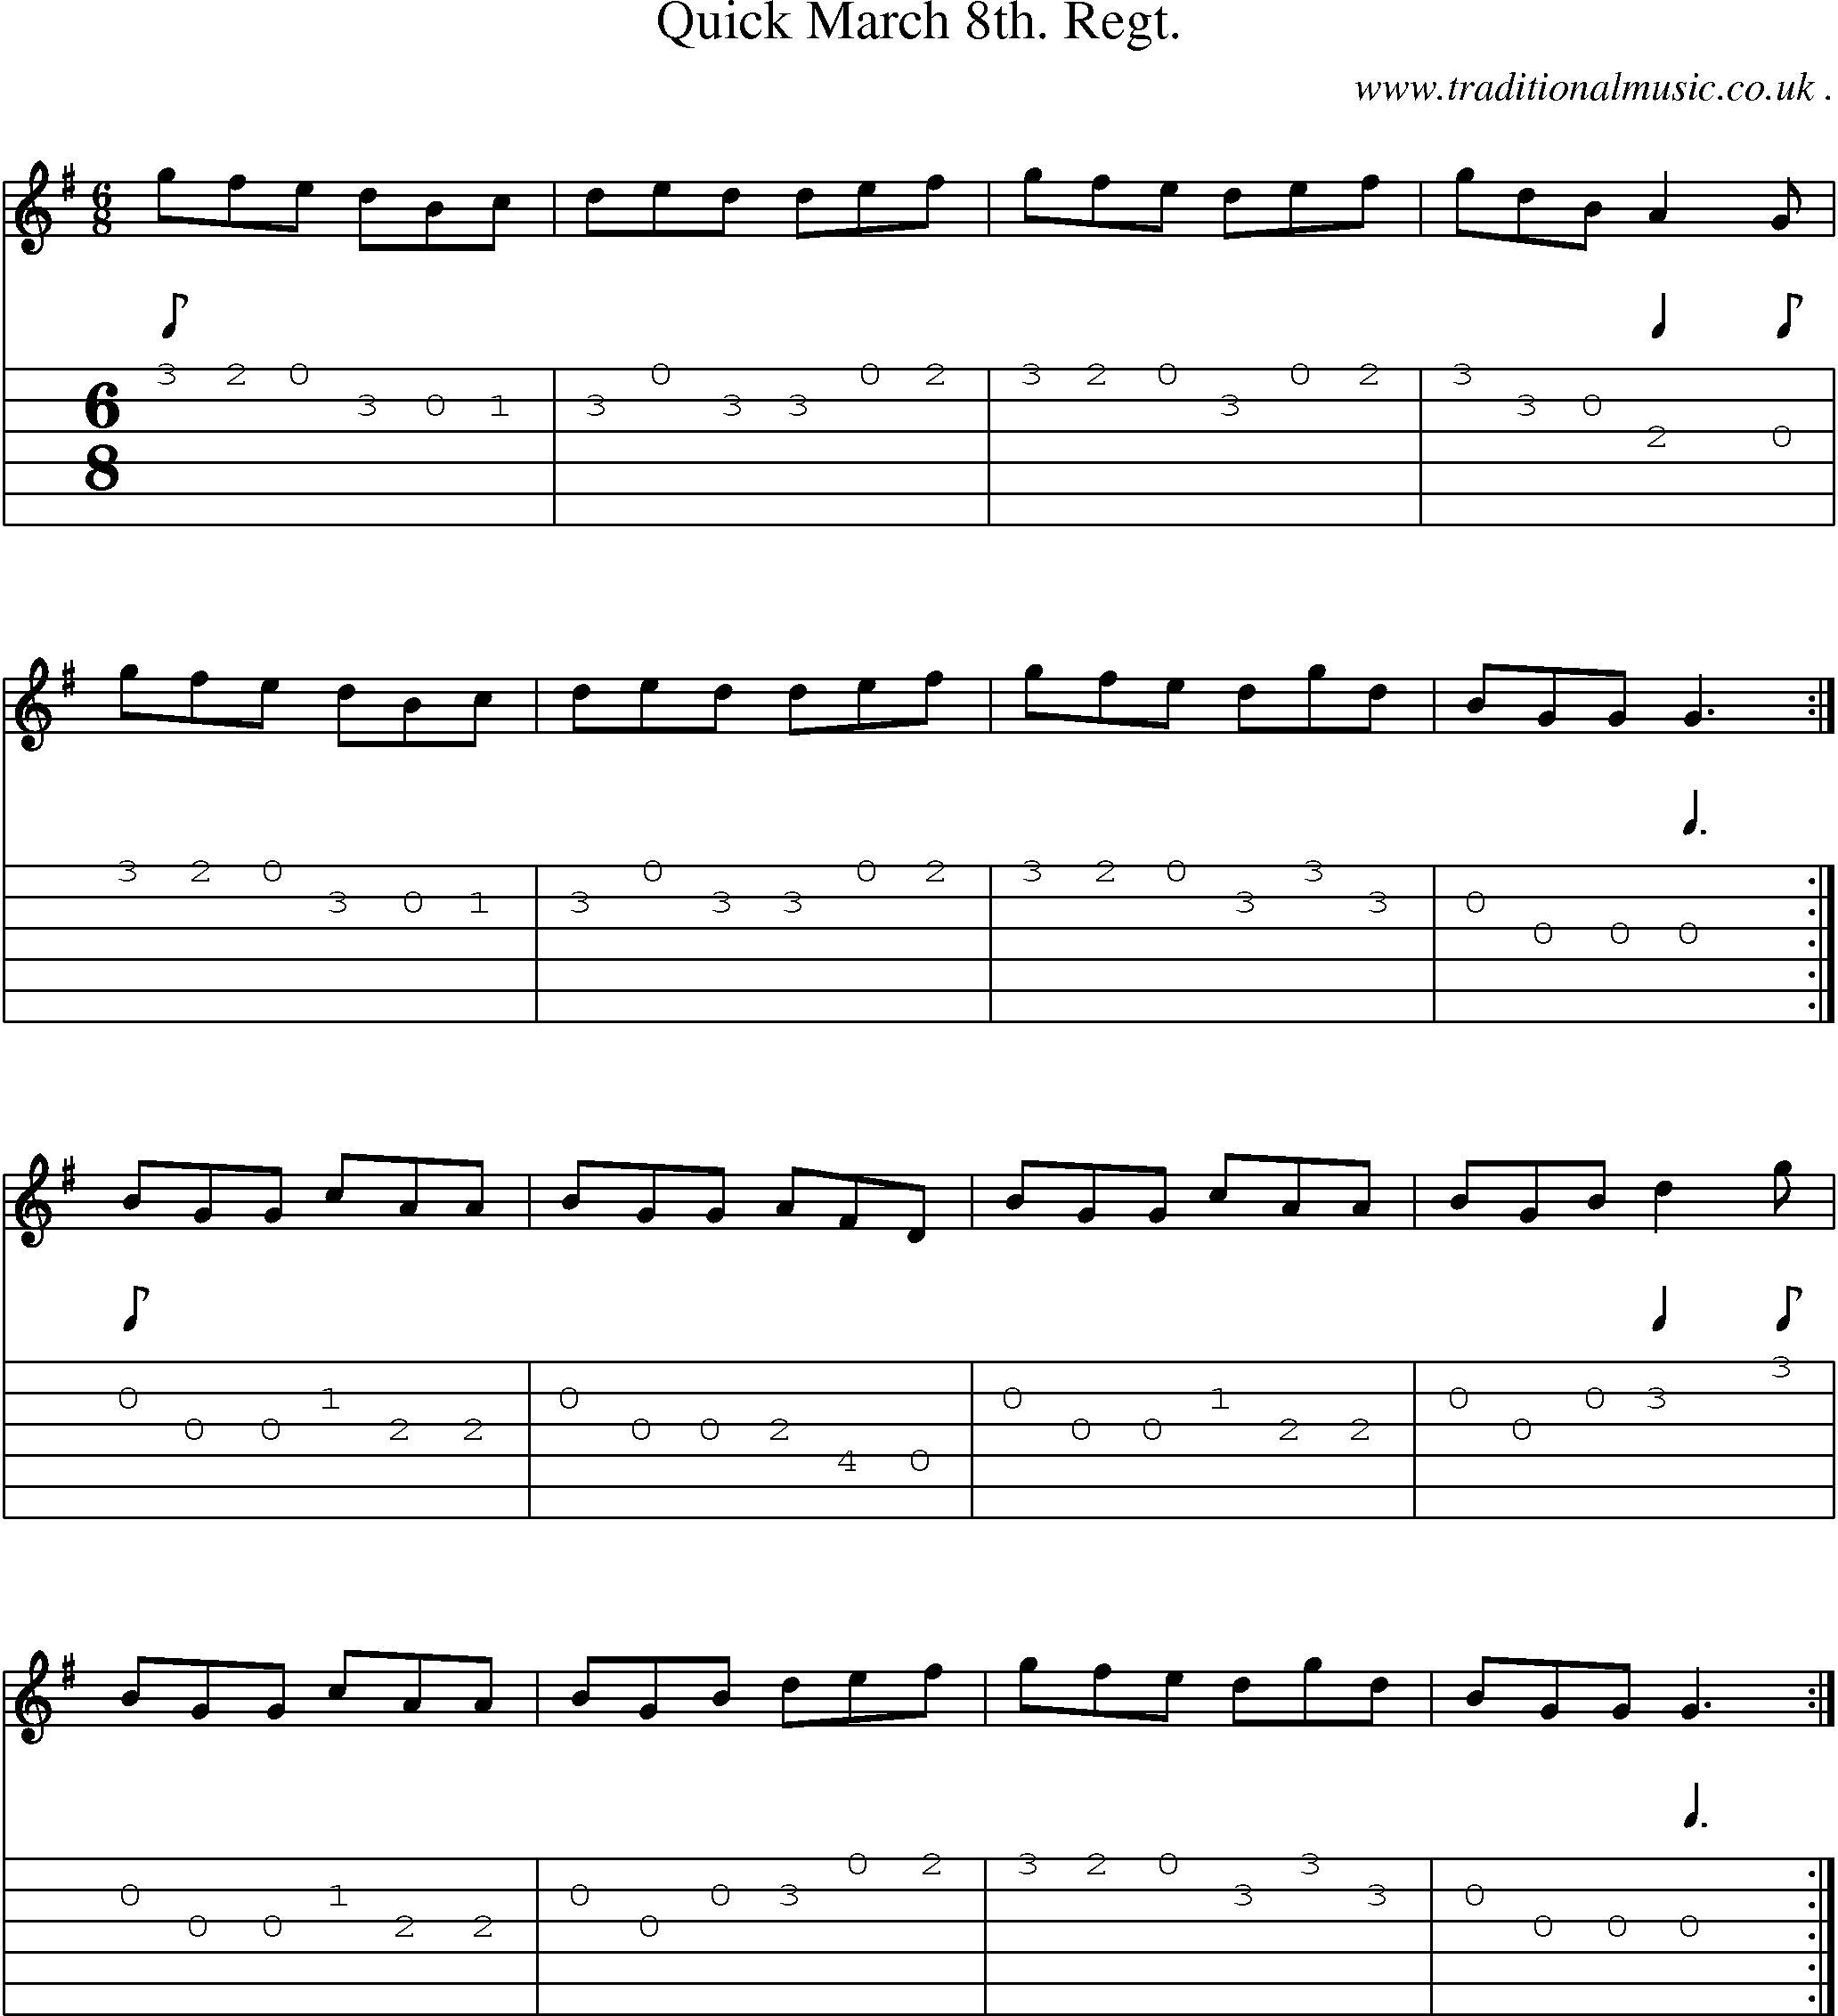 Sheet-music  score, Chords and Guitar Tabs for Quick March 8th Regt